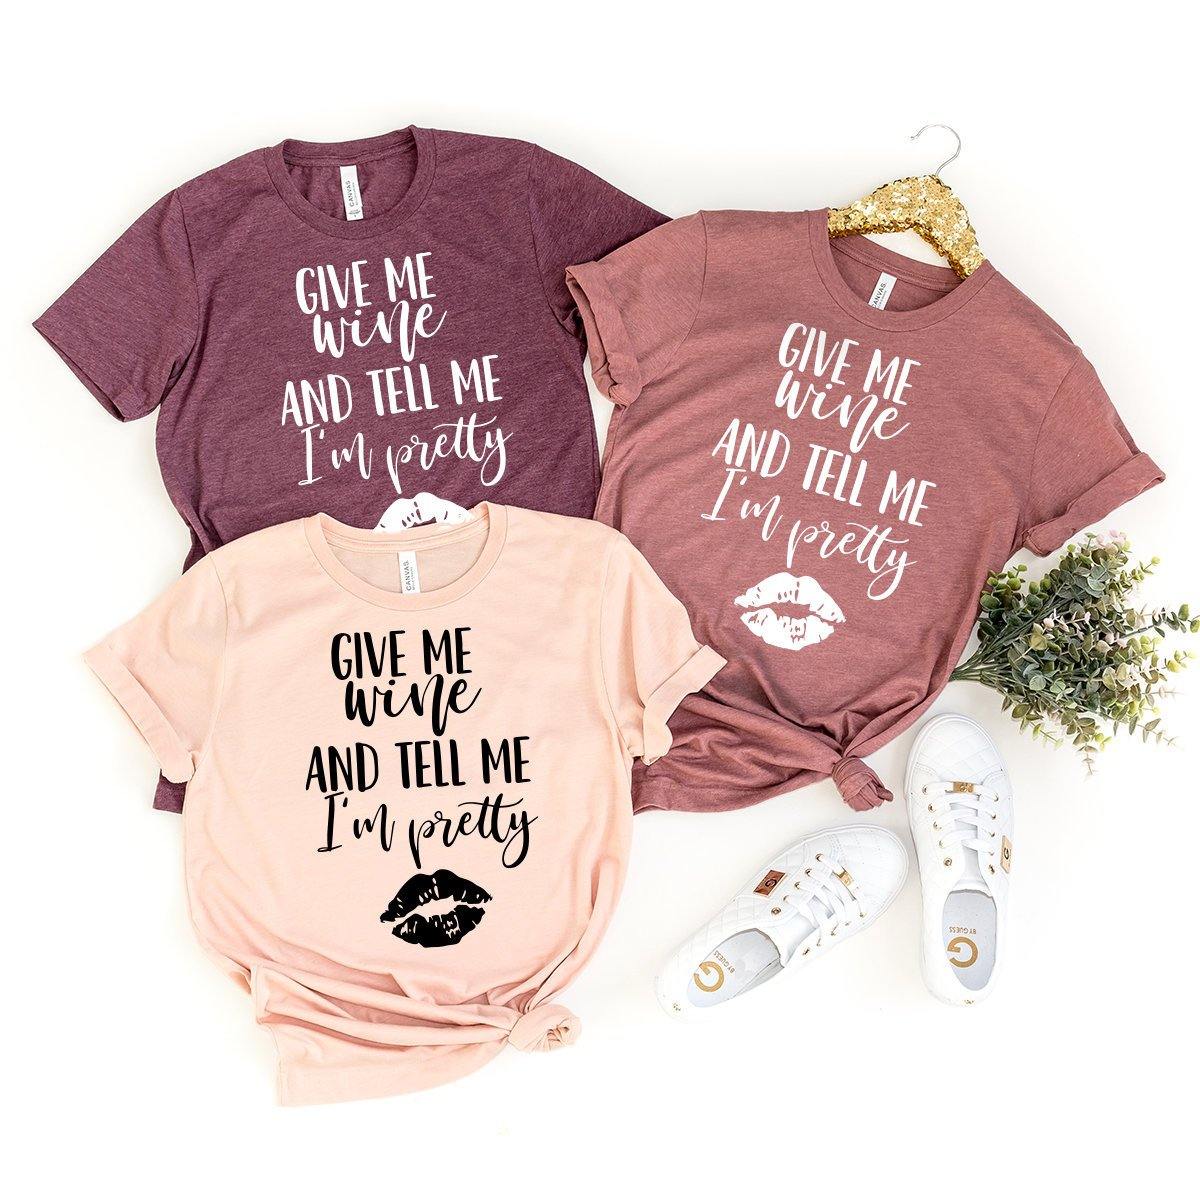 Give Me Wine And Tell Me I'm Pretty Shirt, Wine Shirt, Wine Lover Shirt, Wine Tee, Funny Wine Shirt, Drinking Shirt - Fastdeliverytees.com